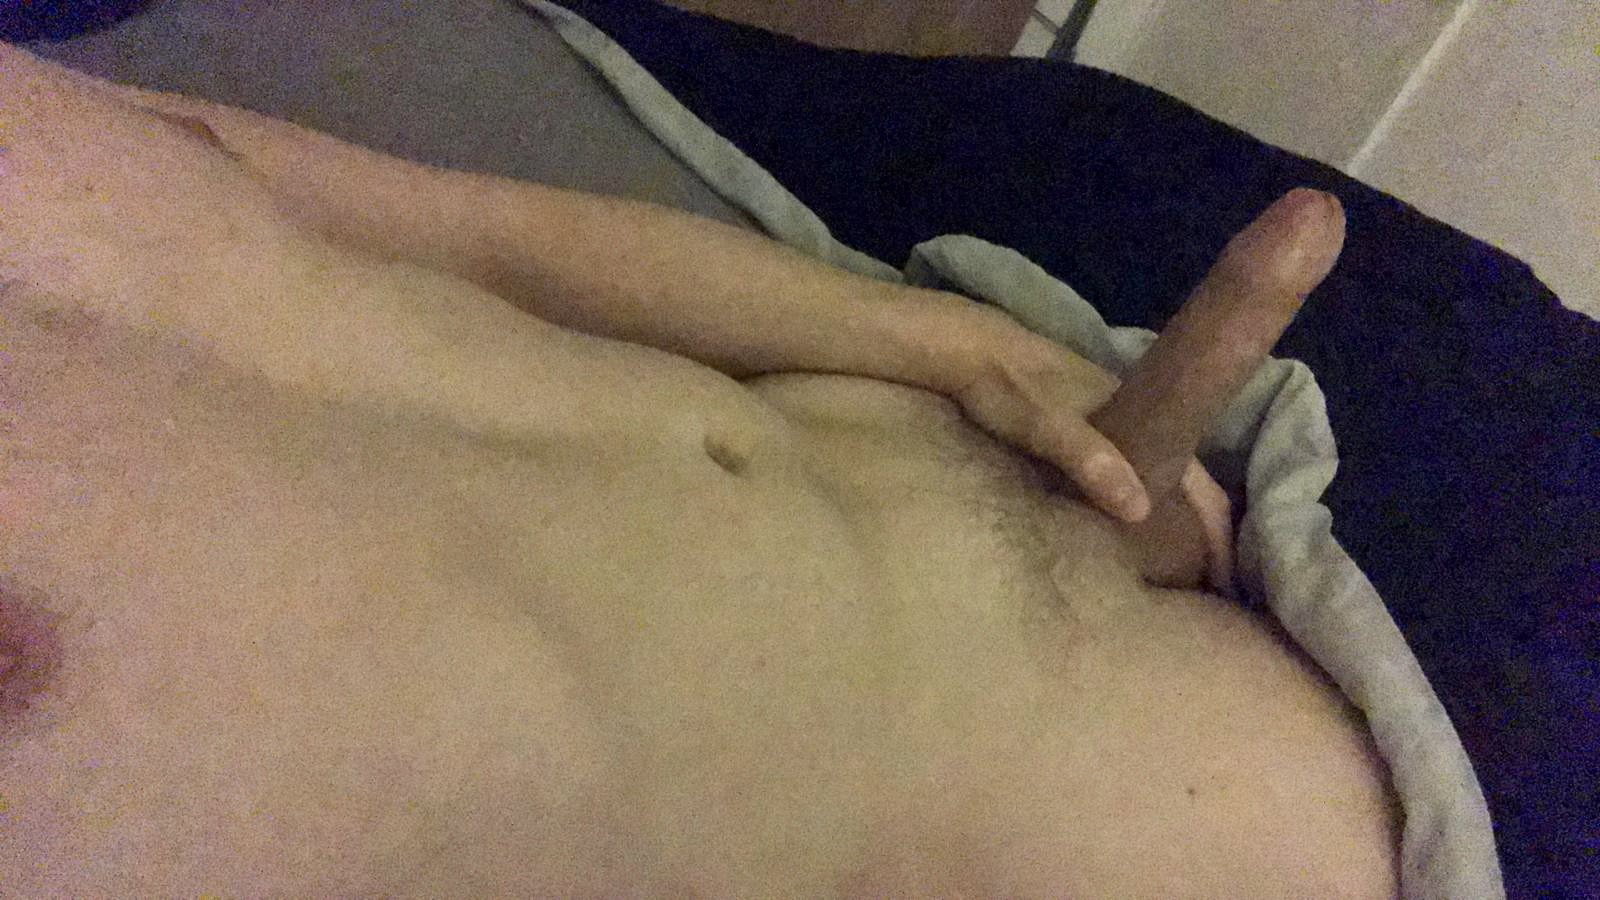 Photo by WillNoir1001 with the username @WillNoir1001,  May 15, 2020 at 3:42 PM. The post is about the topic amateur fun and the text says 'Been feeling very horny today distracted looking at all my sexy friends on here instead of working! So as its been a while i just thought id share a little peak with you 😈 lucky im at home 😉 xx'